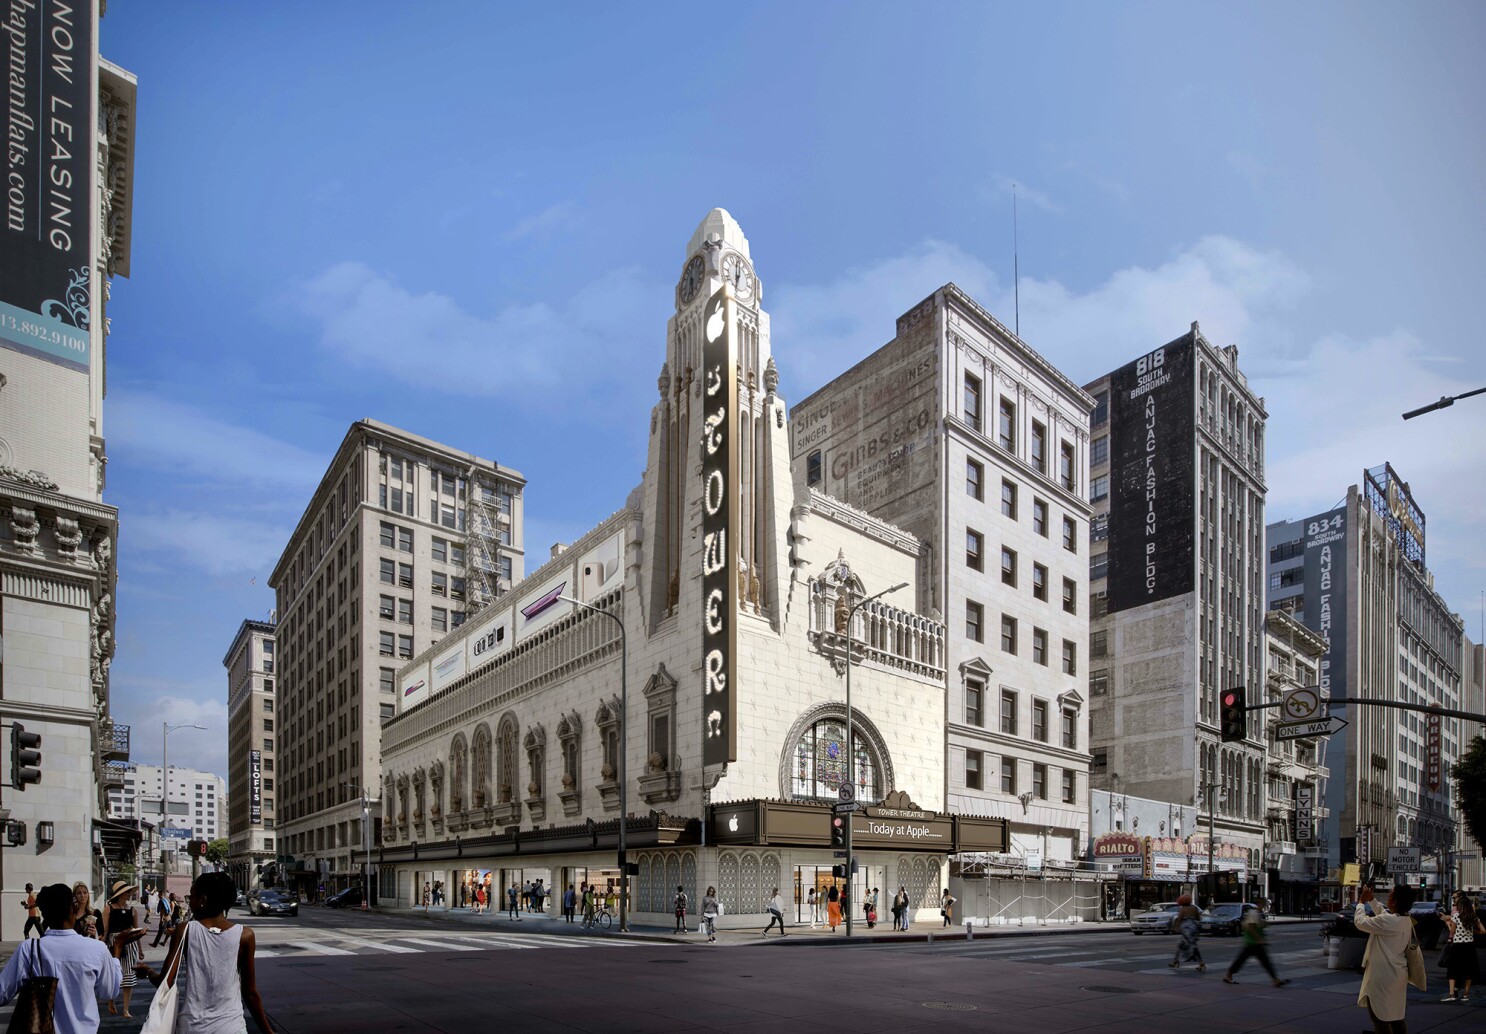 At The Historic Downtown La Tower Theatre Apple Plans A Store And Event Space Unlike Any Other - Los Angeles Times